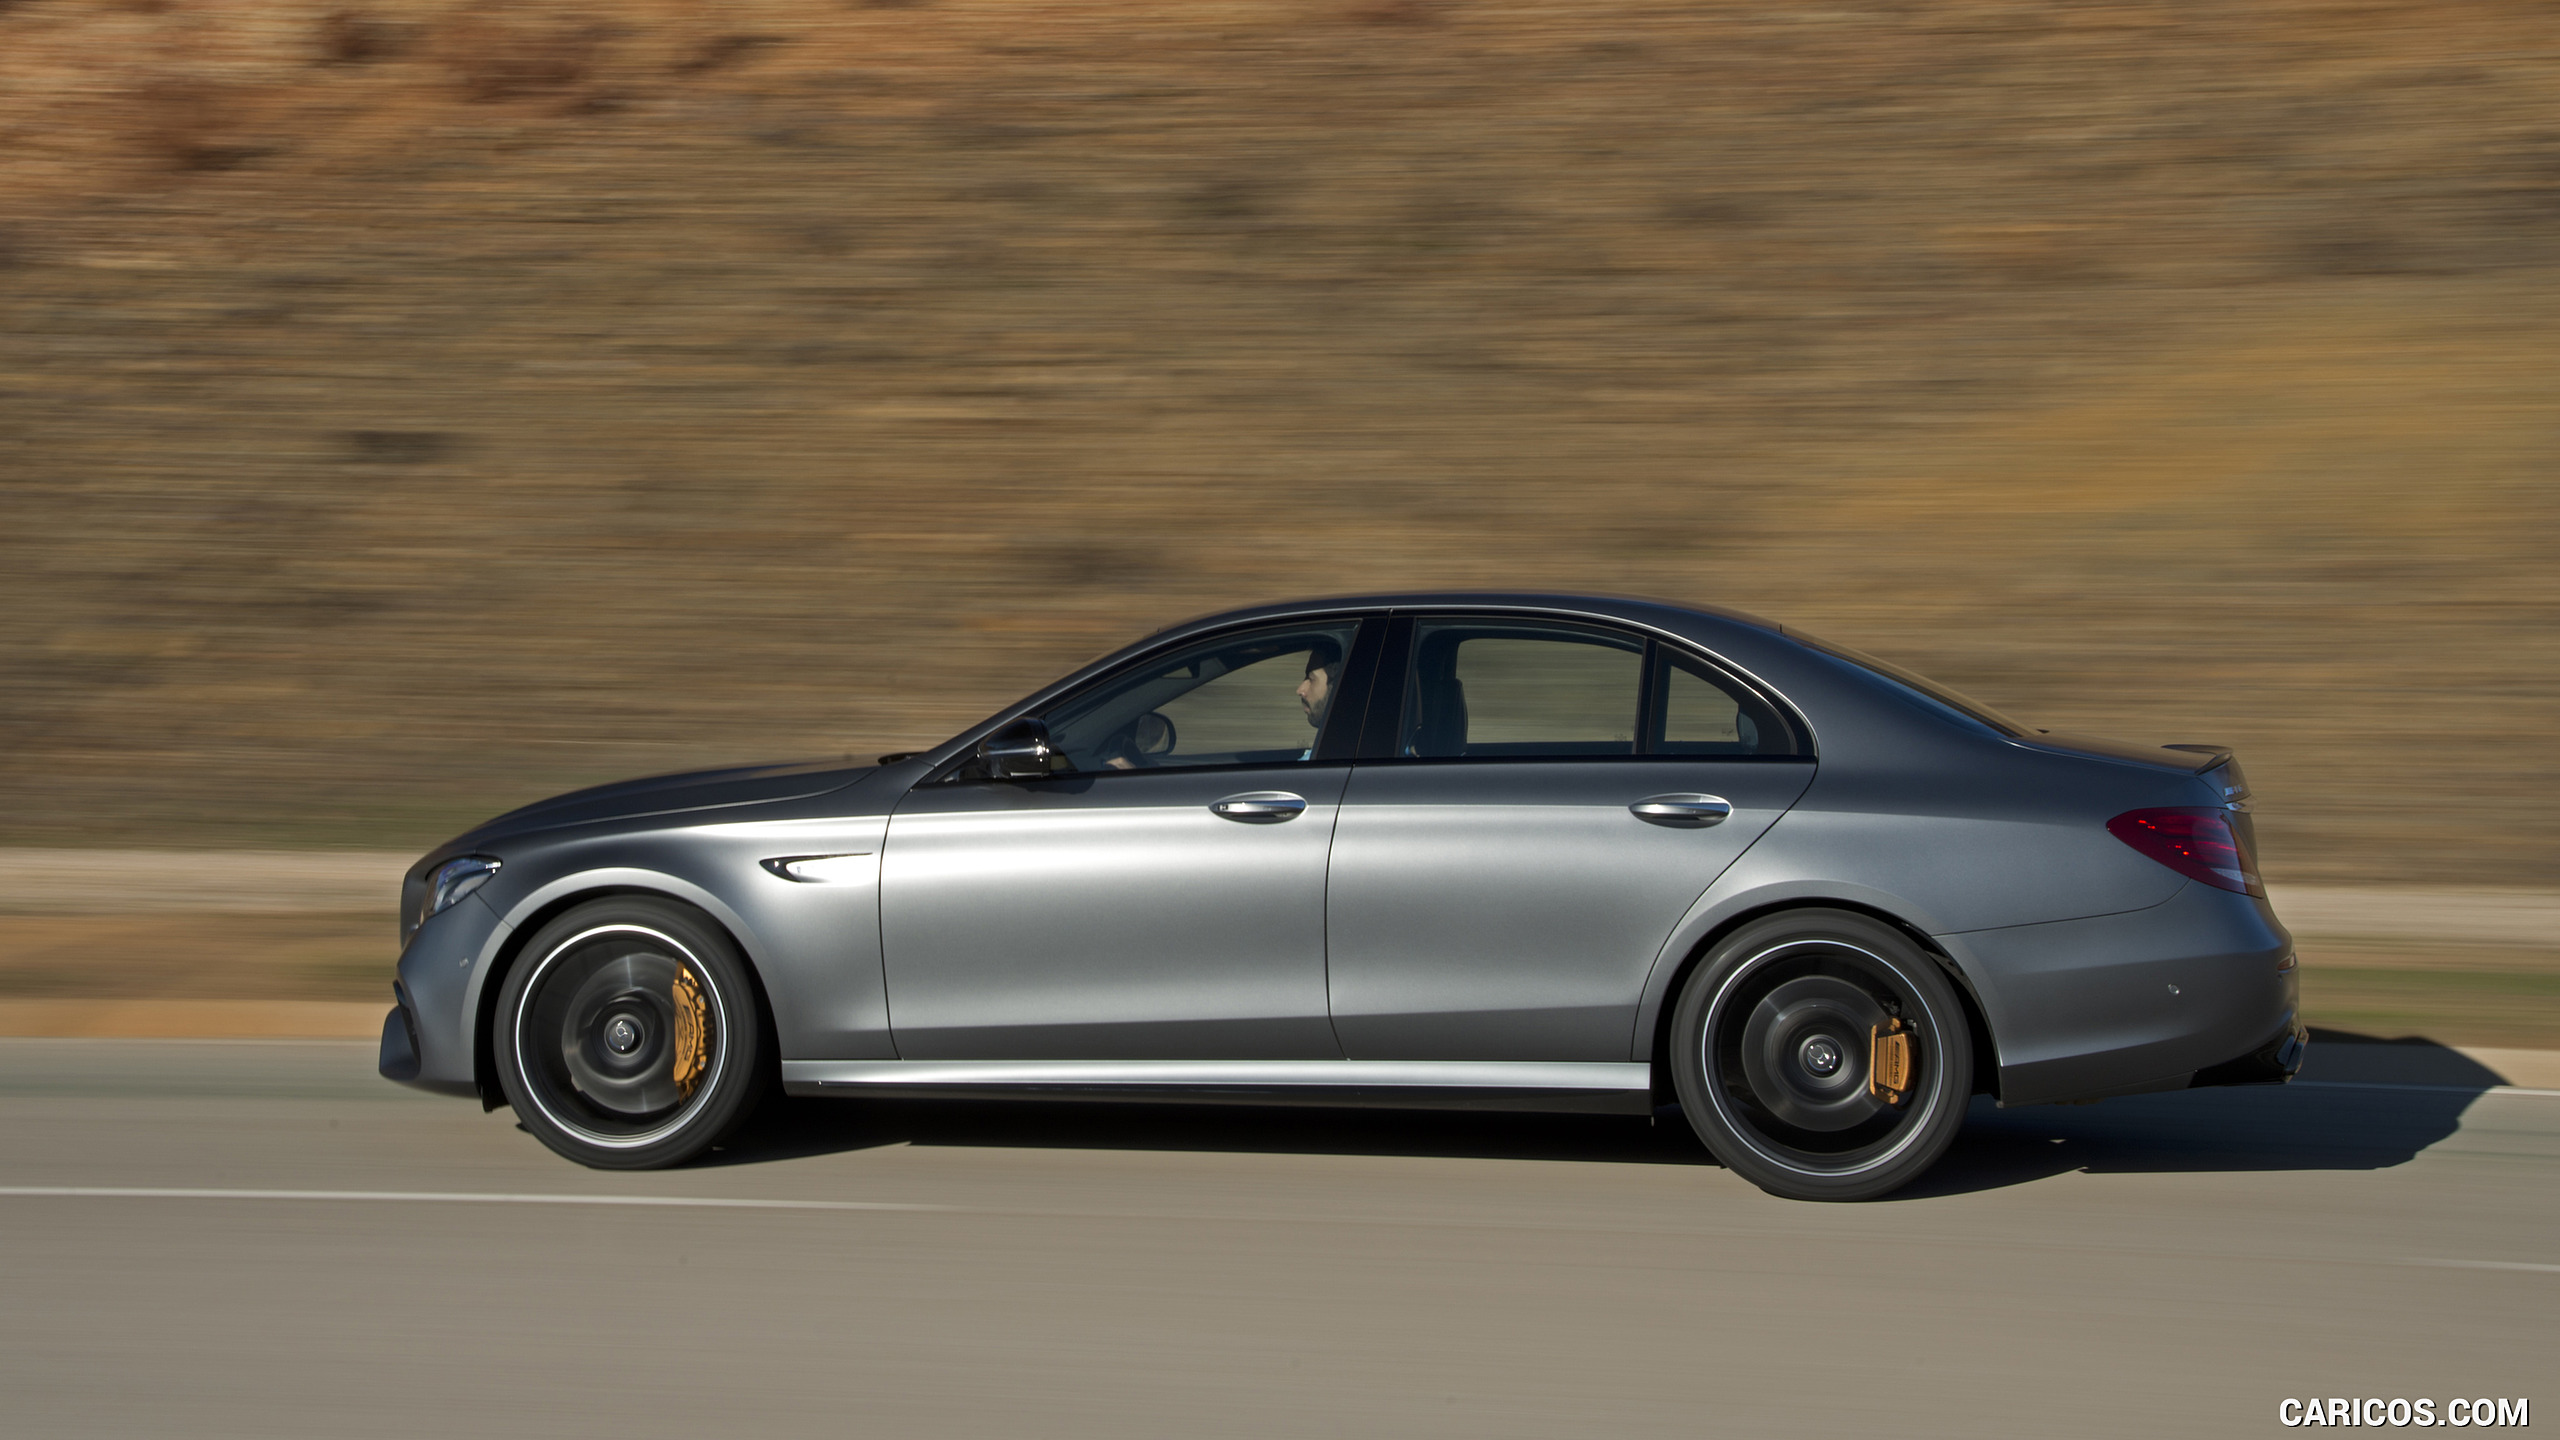 2018 Mercedes-AMG E63 S 4MATIC+ - Side, #294 of 323